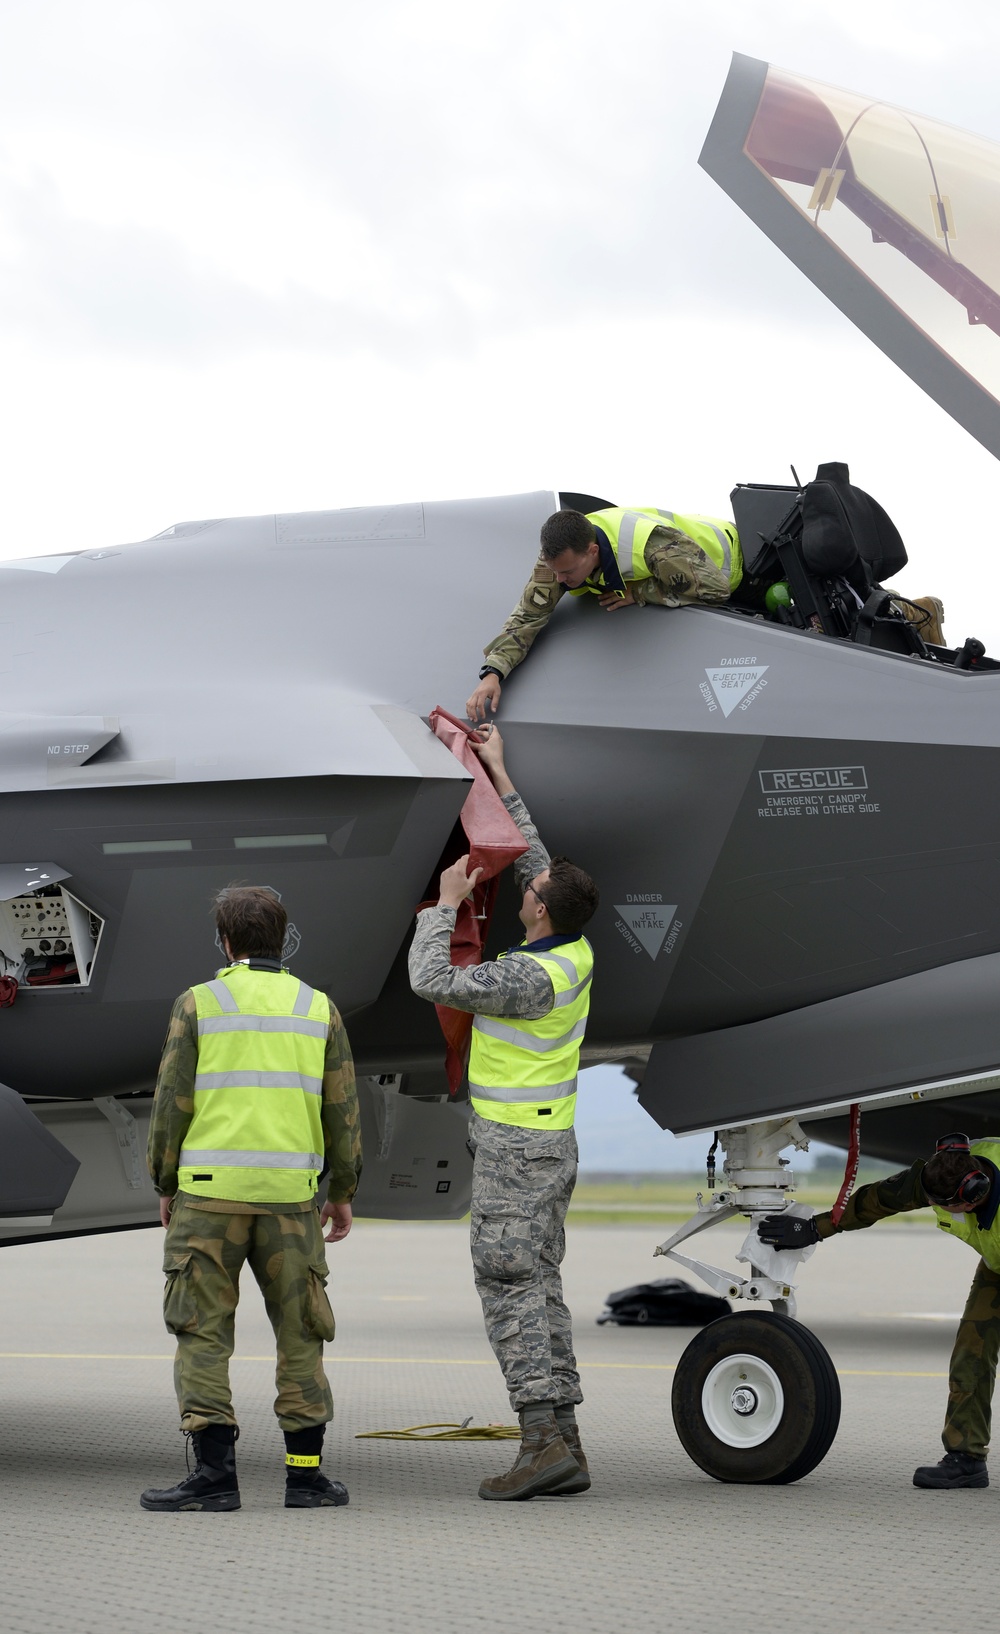 Norwegian F-35 maintainers turn American jets in historic first visit